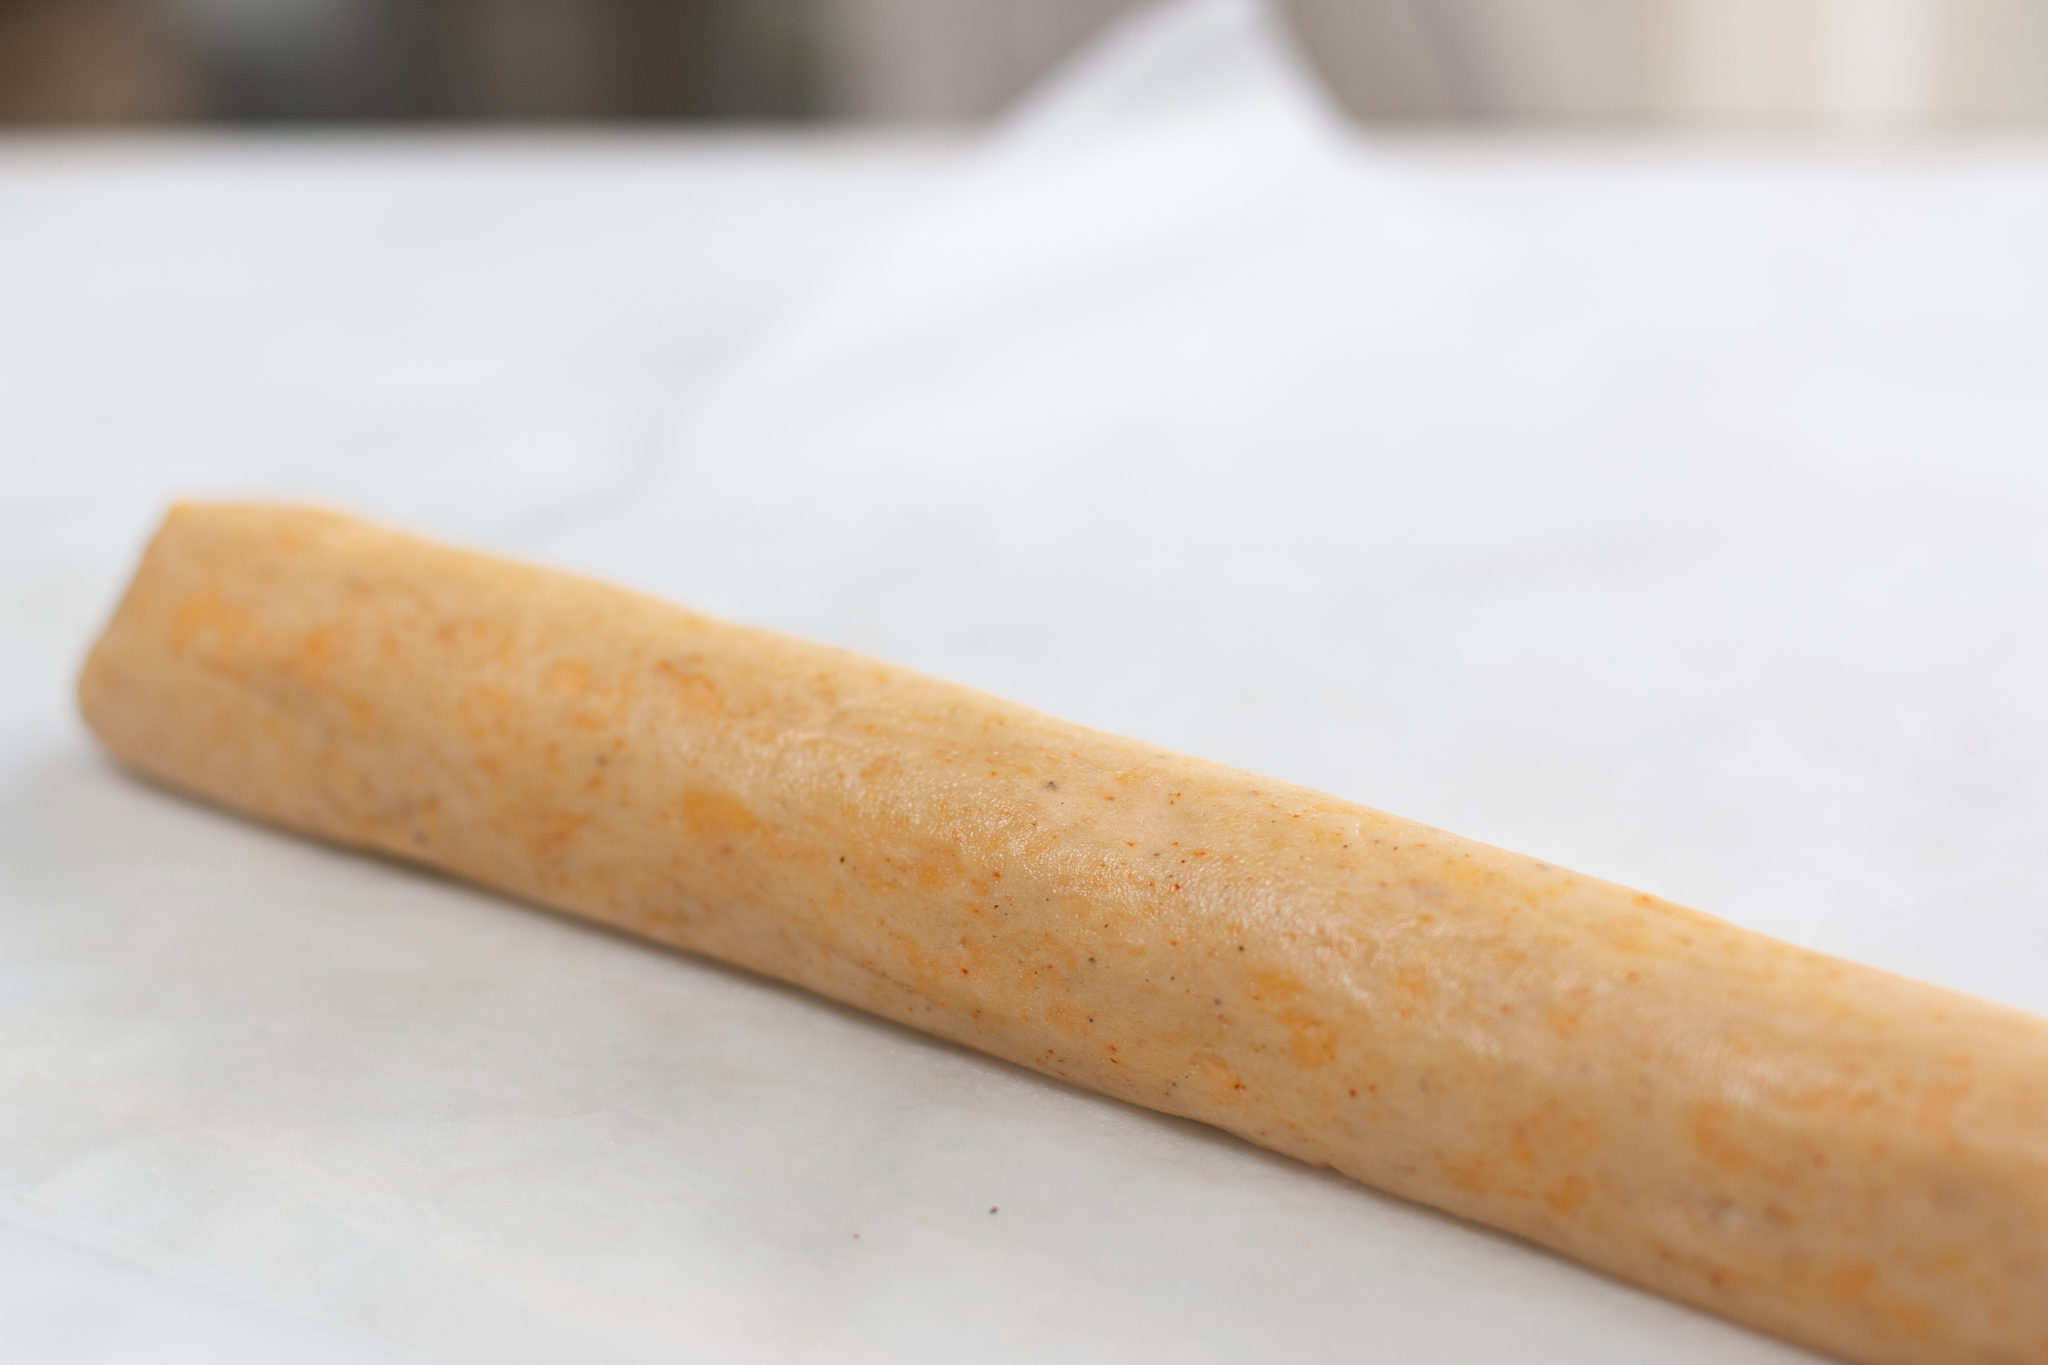 Using waxed paper – roll the dough into a log and refrigerate until cold and hardened